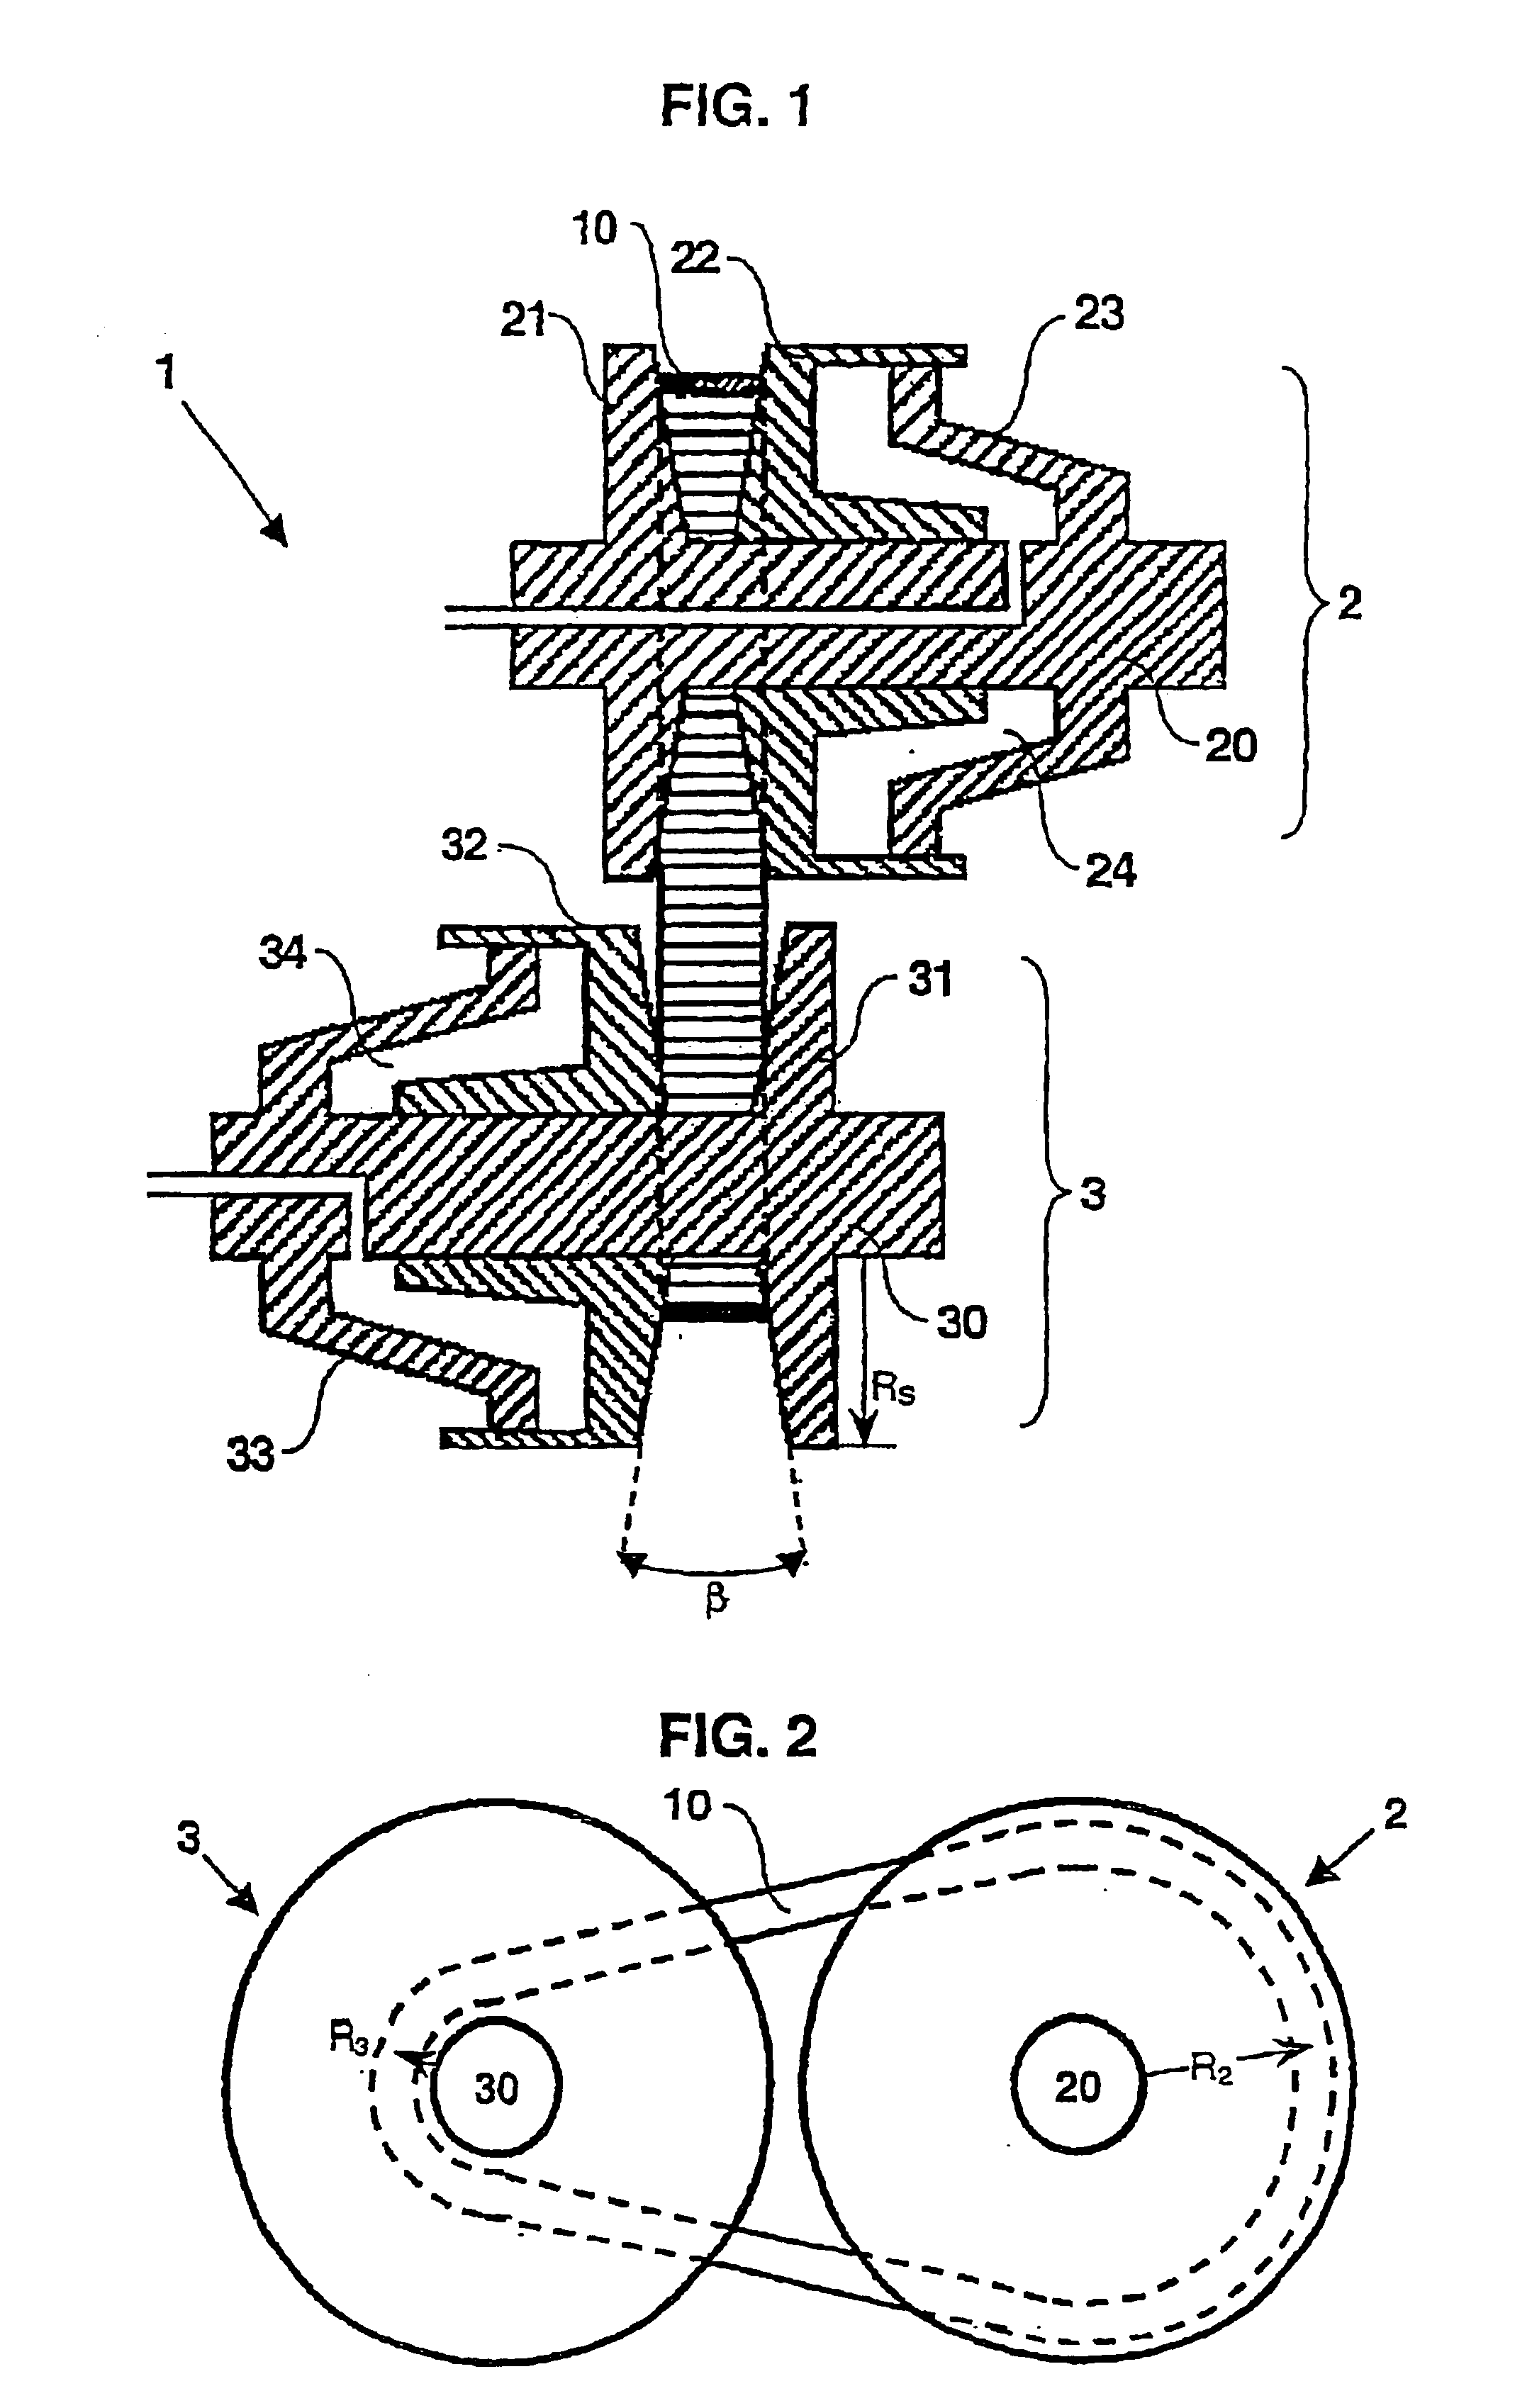 Continuously variable transmission, endless flexible belt for torque transmission and adjustable pulley